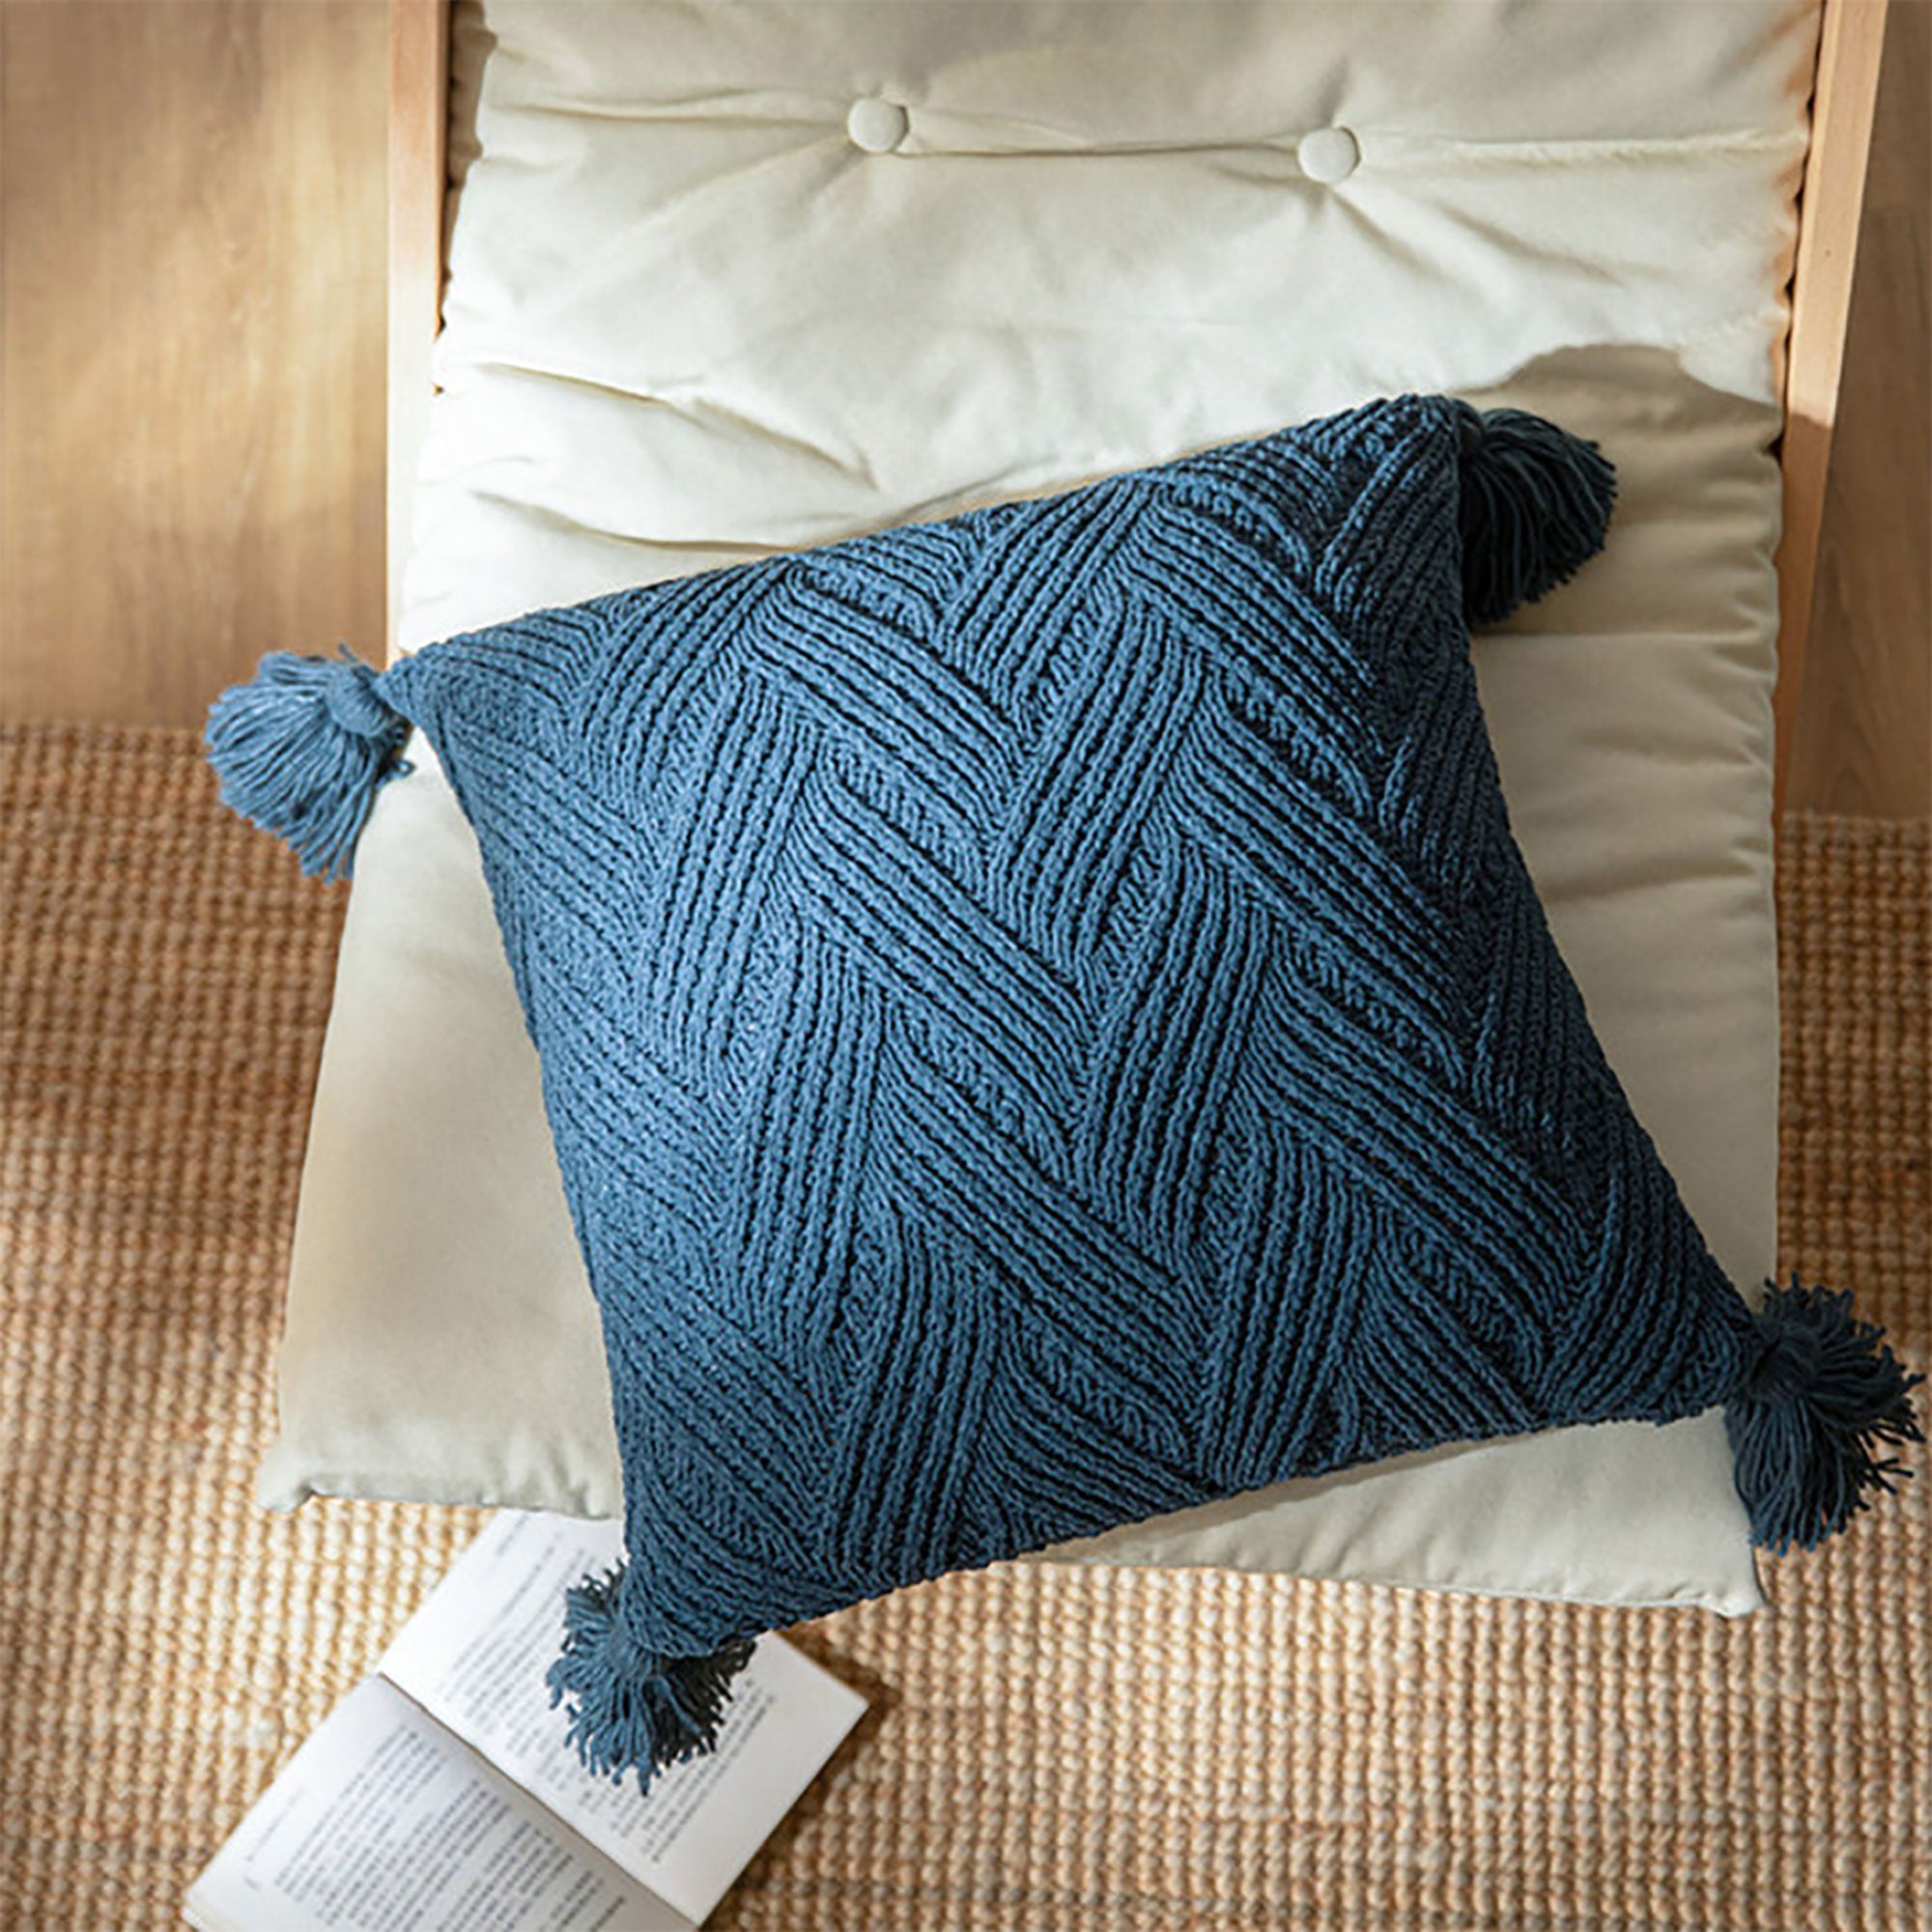 Knitted Cushion with Tassels-45cm x 45cm-Teal